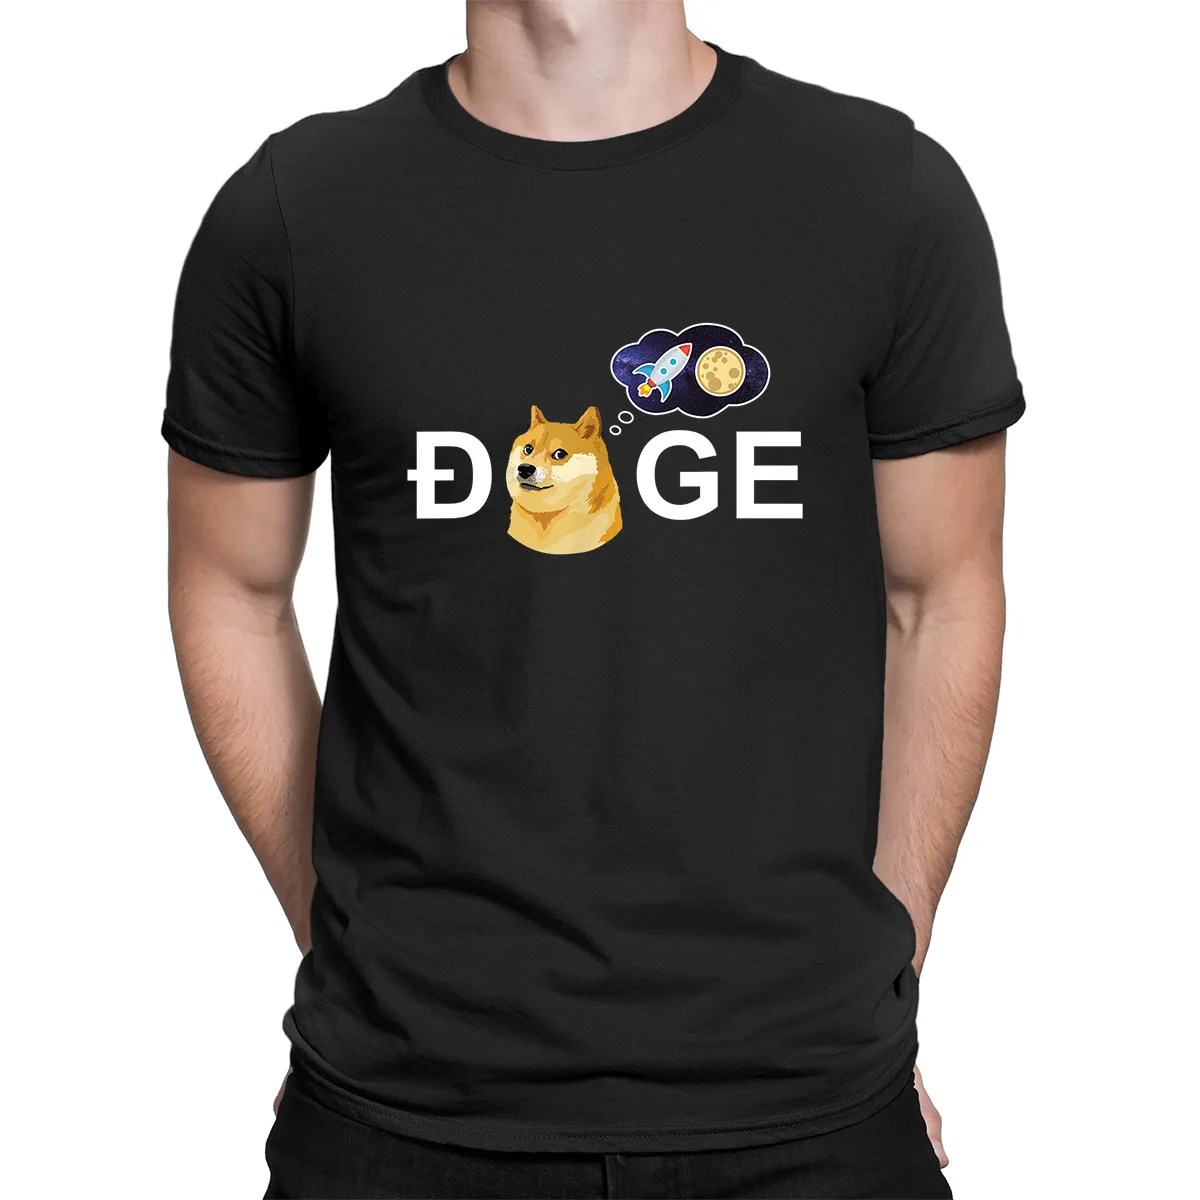 

Dogecoin Doge HODL To the Moon Crypto Meme Print T-shirts Men Summer 2021 dog Graphic Men's T Shirt Short Sleeve Funny Tops